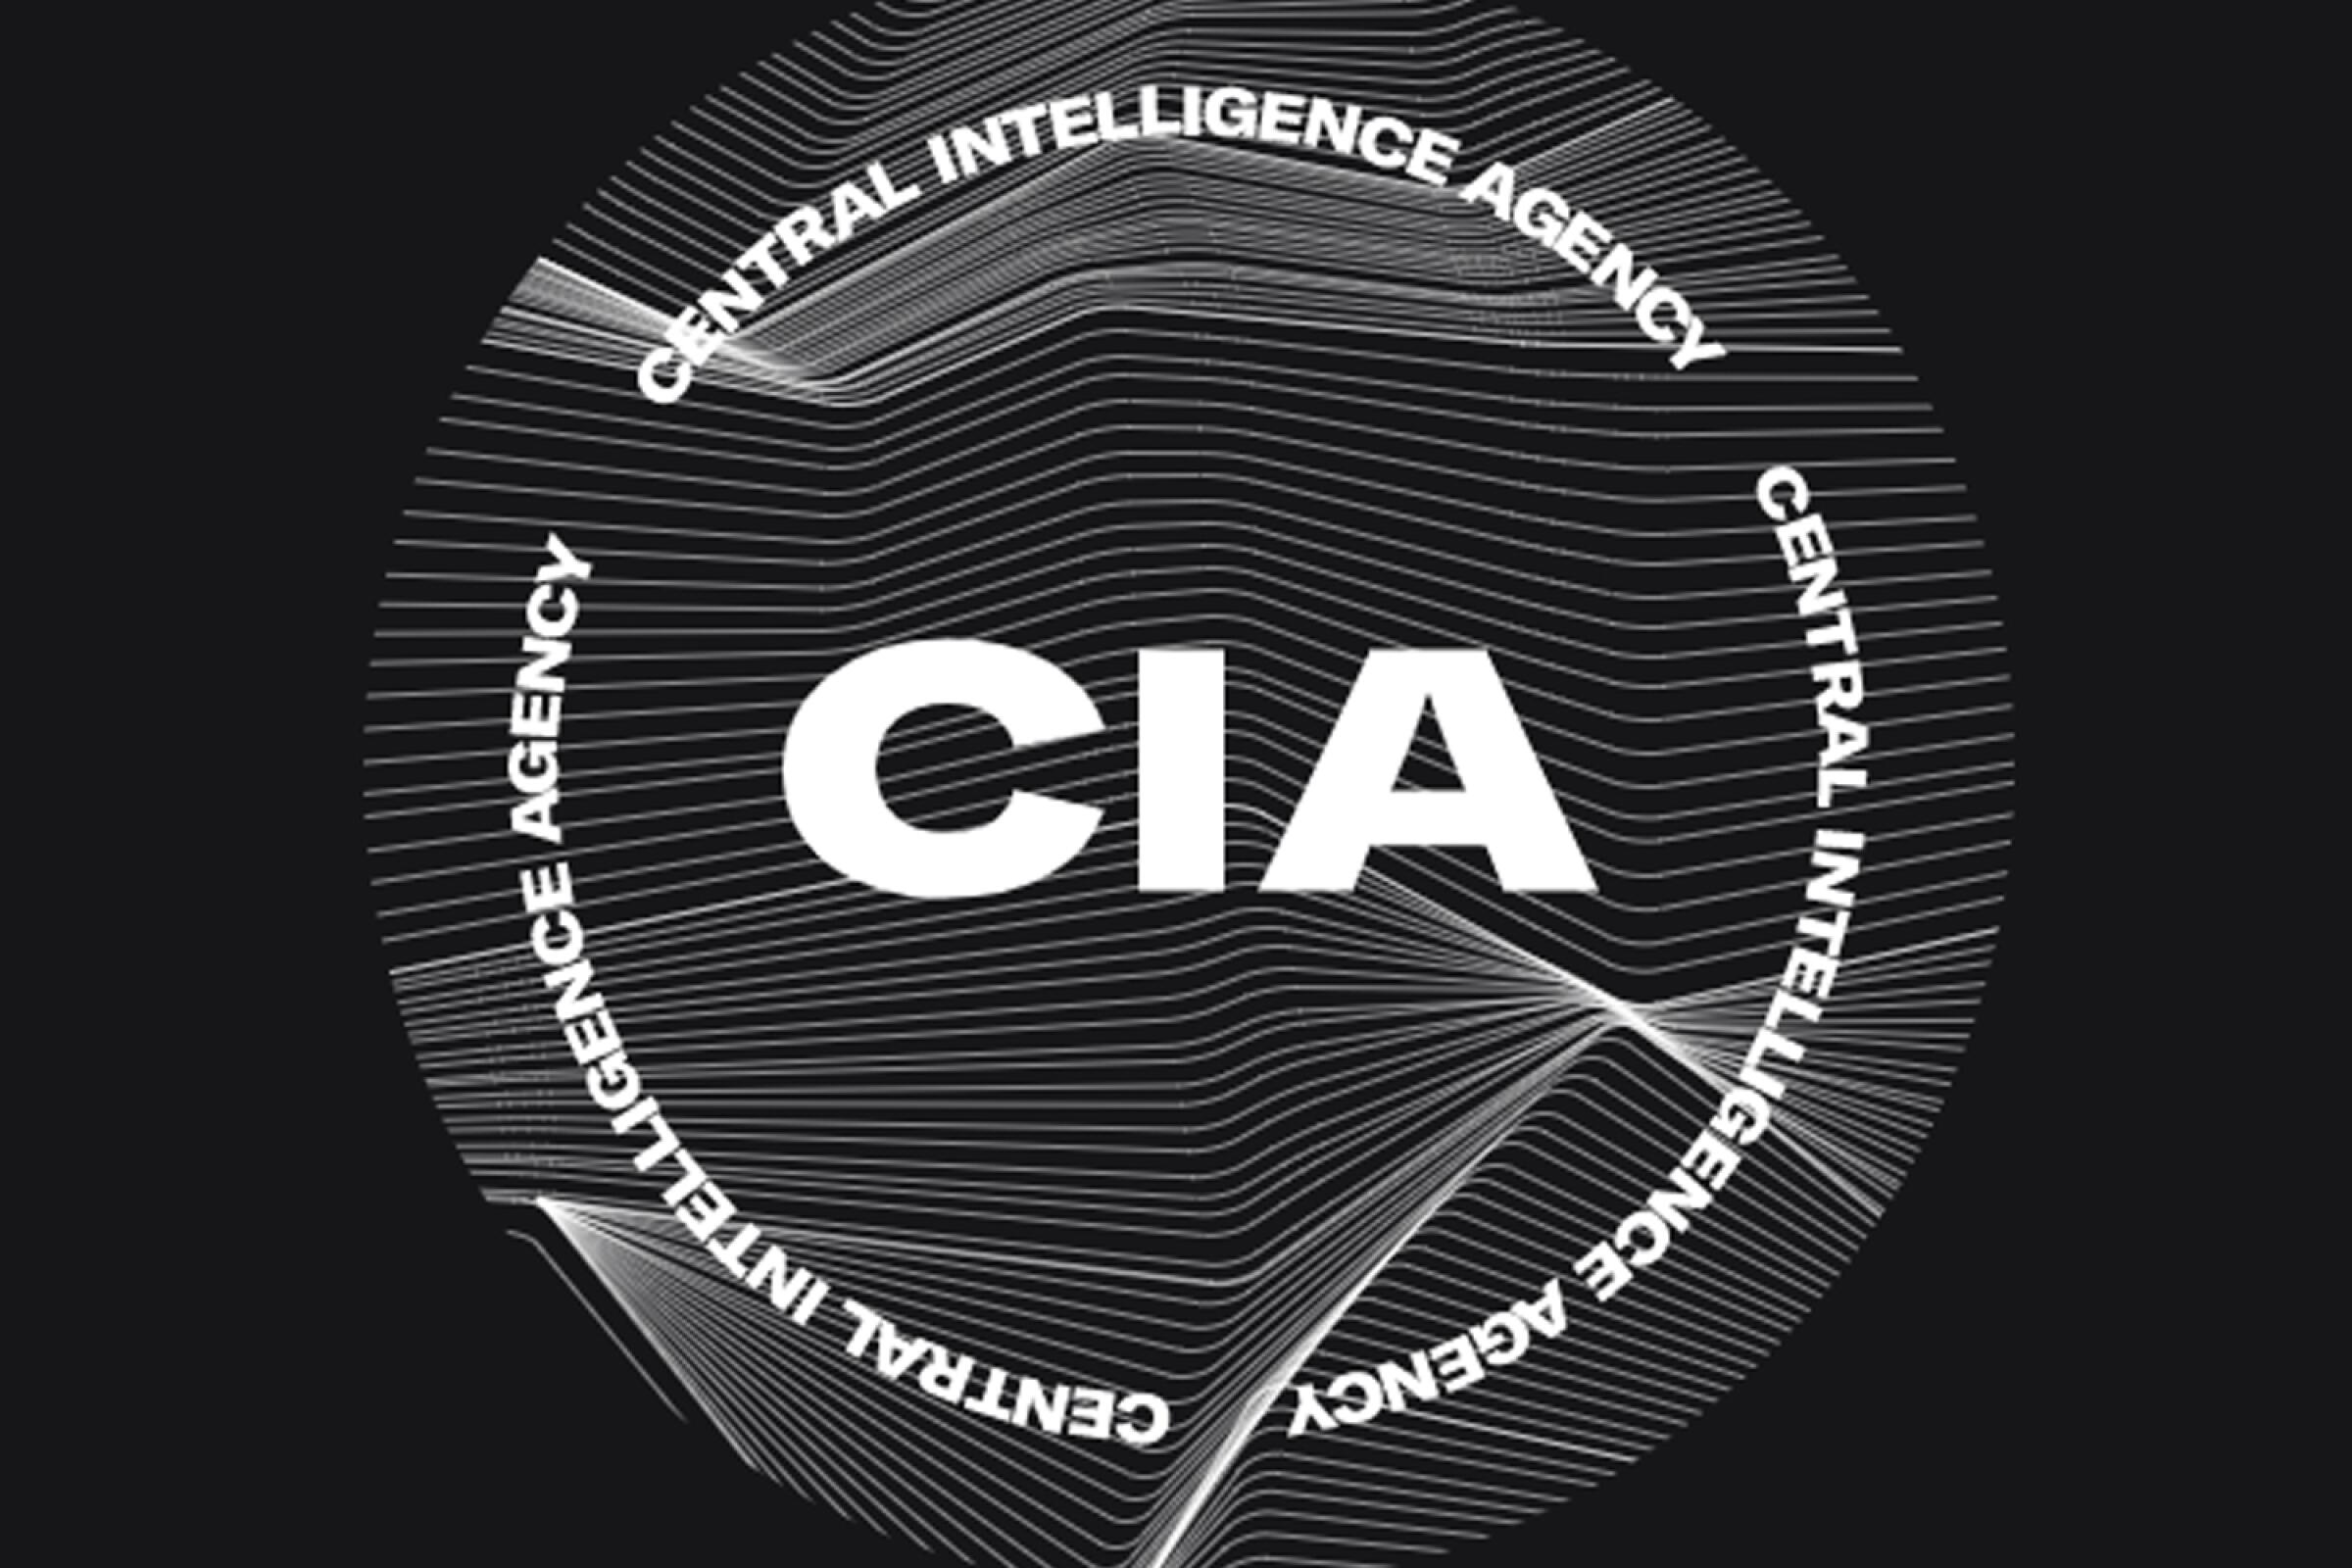 The letters "CIA" in white over a lined, black ground 